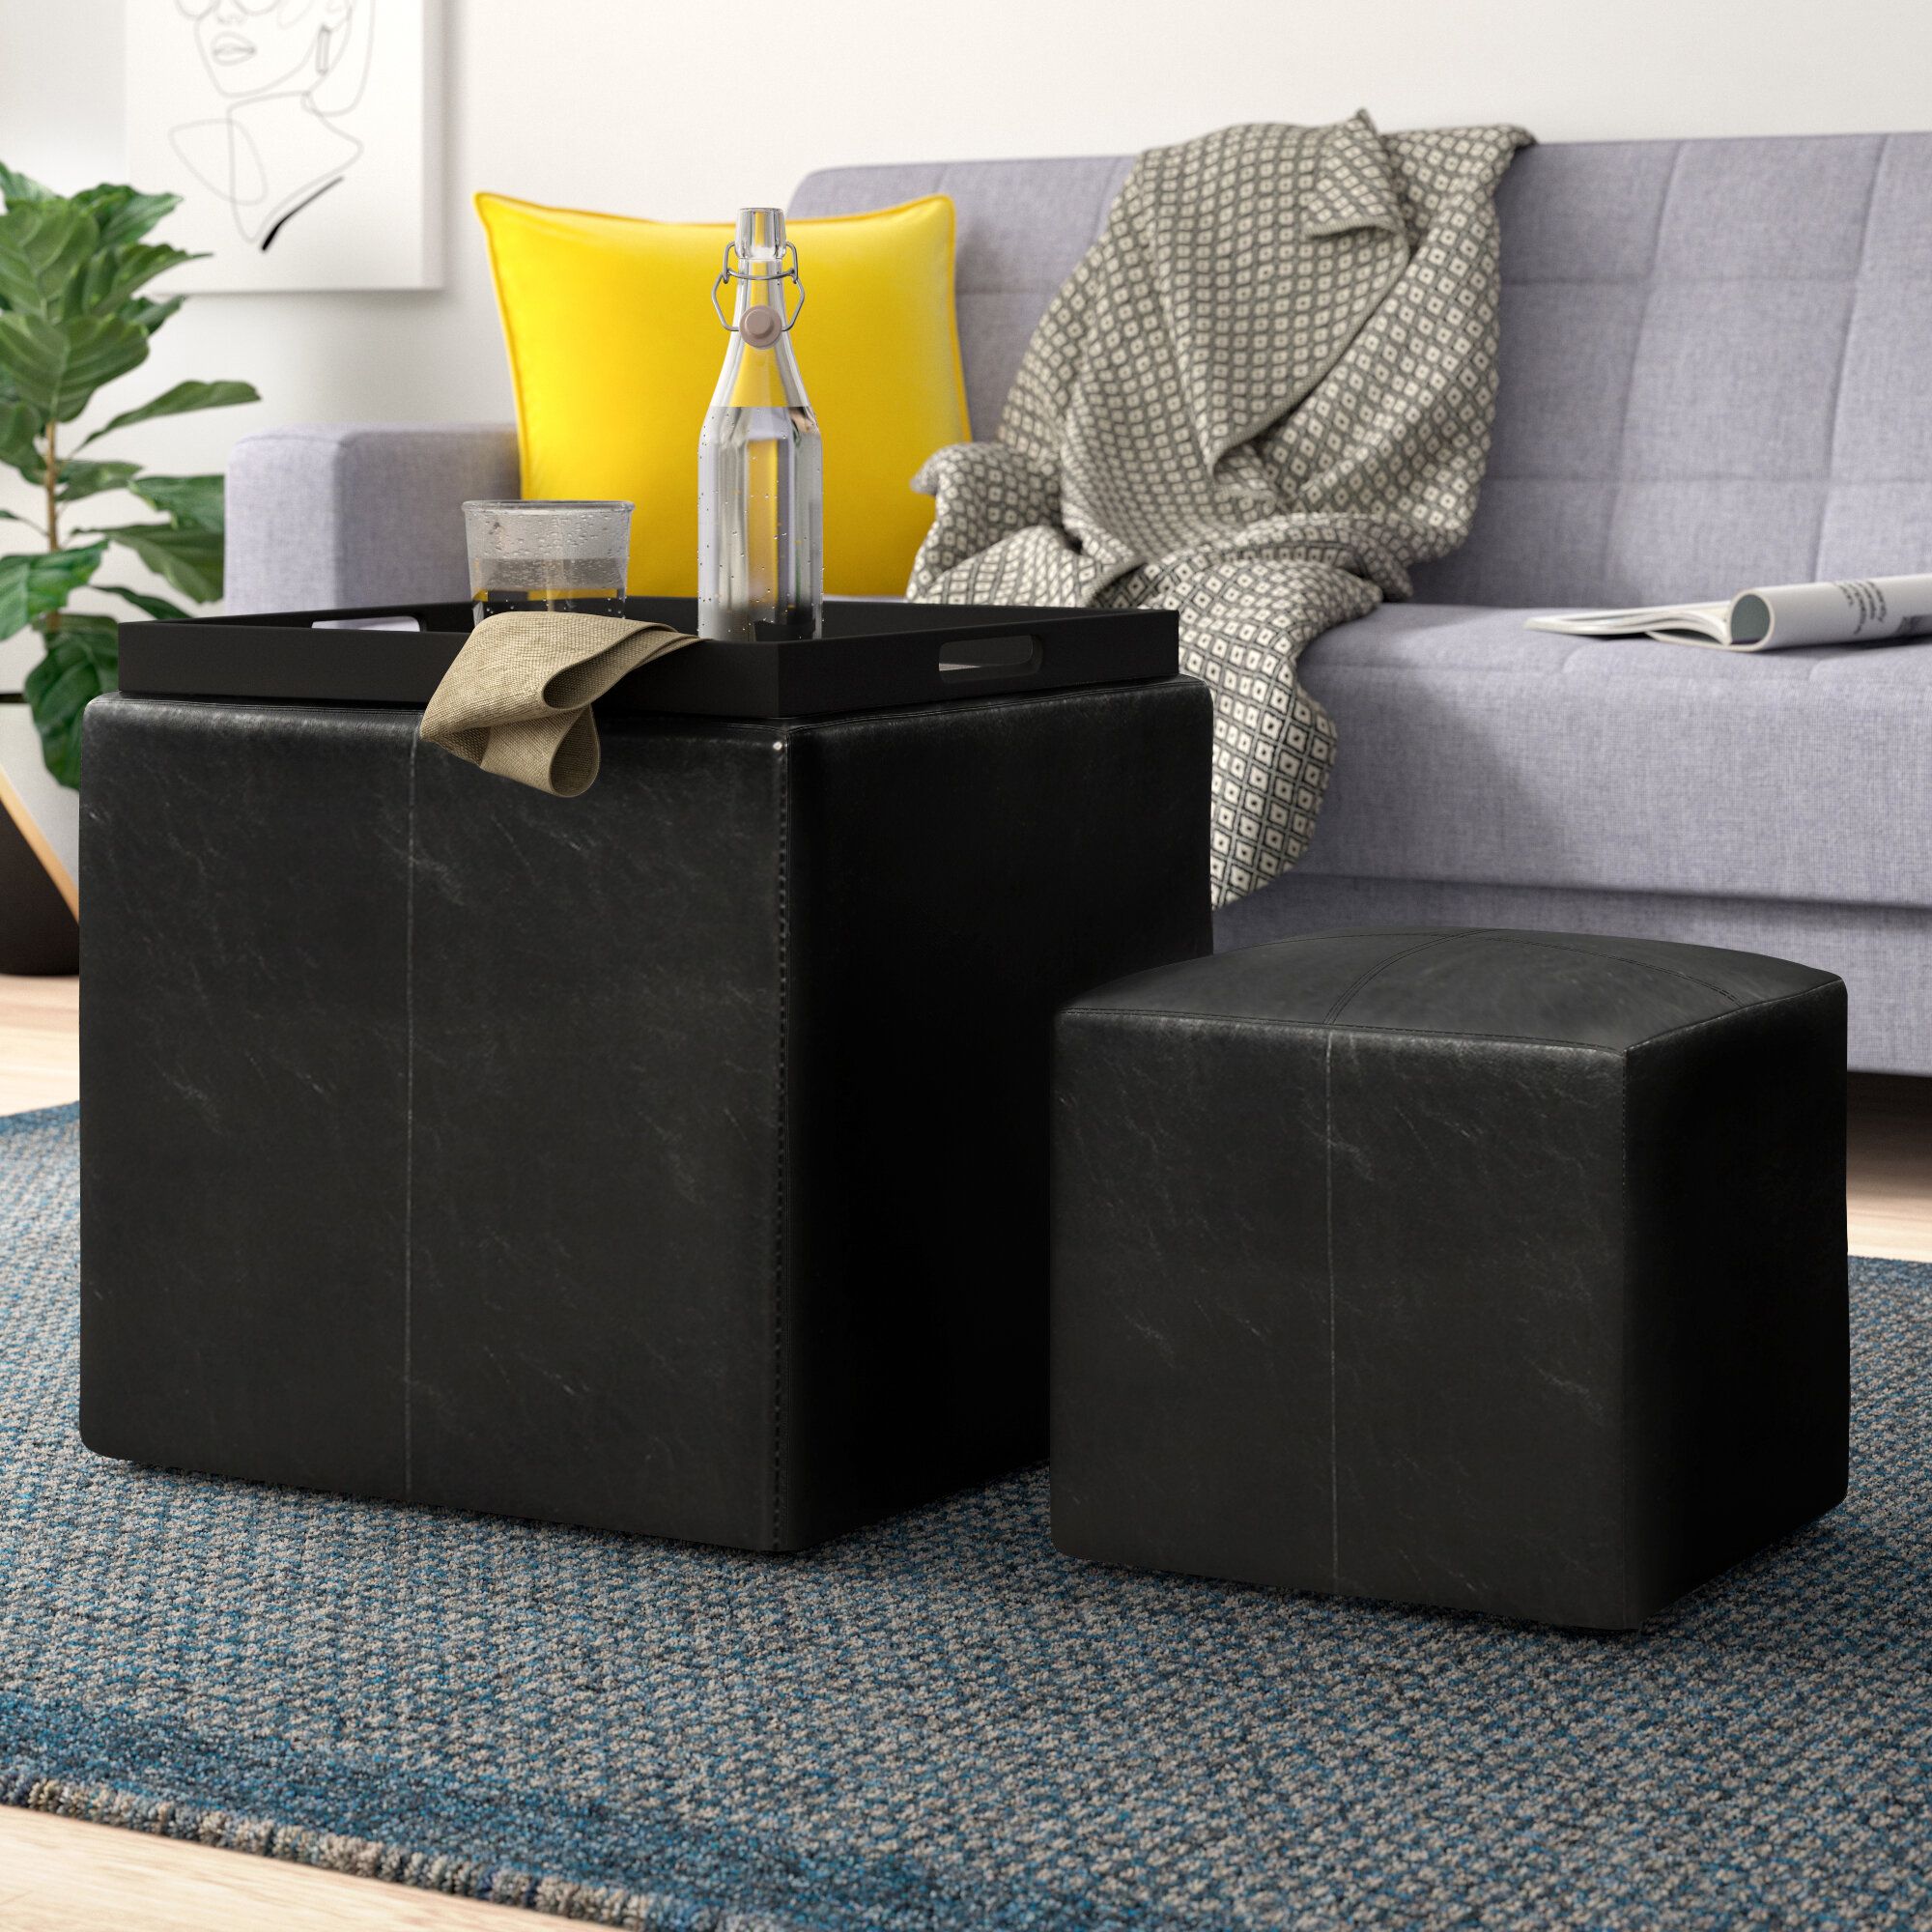 Zipcode Design™ Marla Square Ottoman With Stool And Reversible Tray &  Reviews | Wayfair For Ottomans With Stool And Reversible Tray (View 1 of 15)